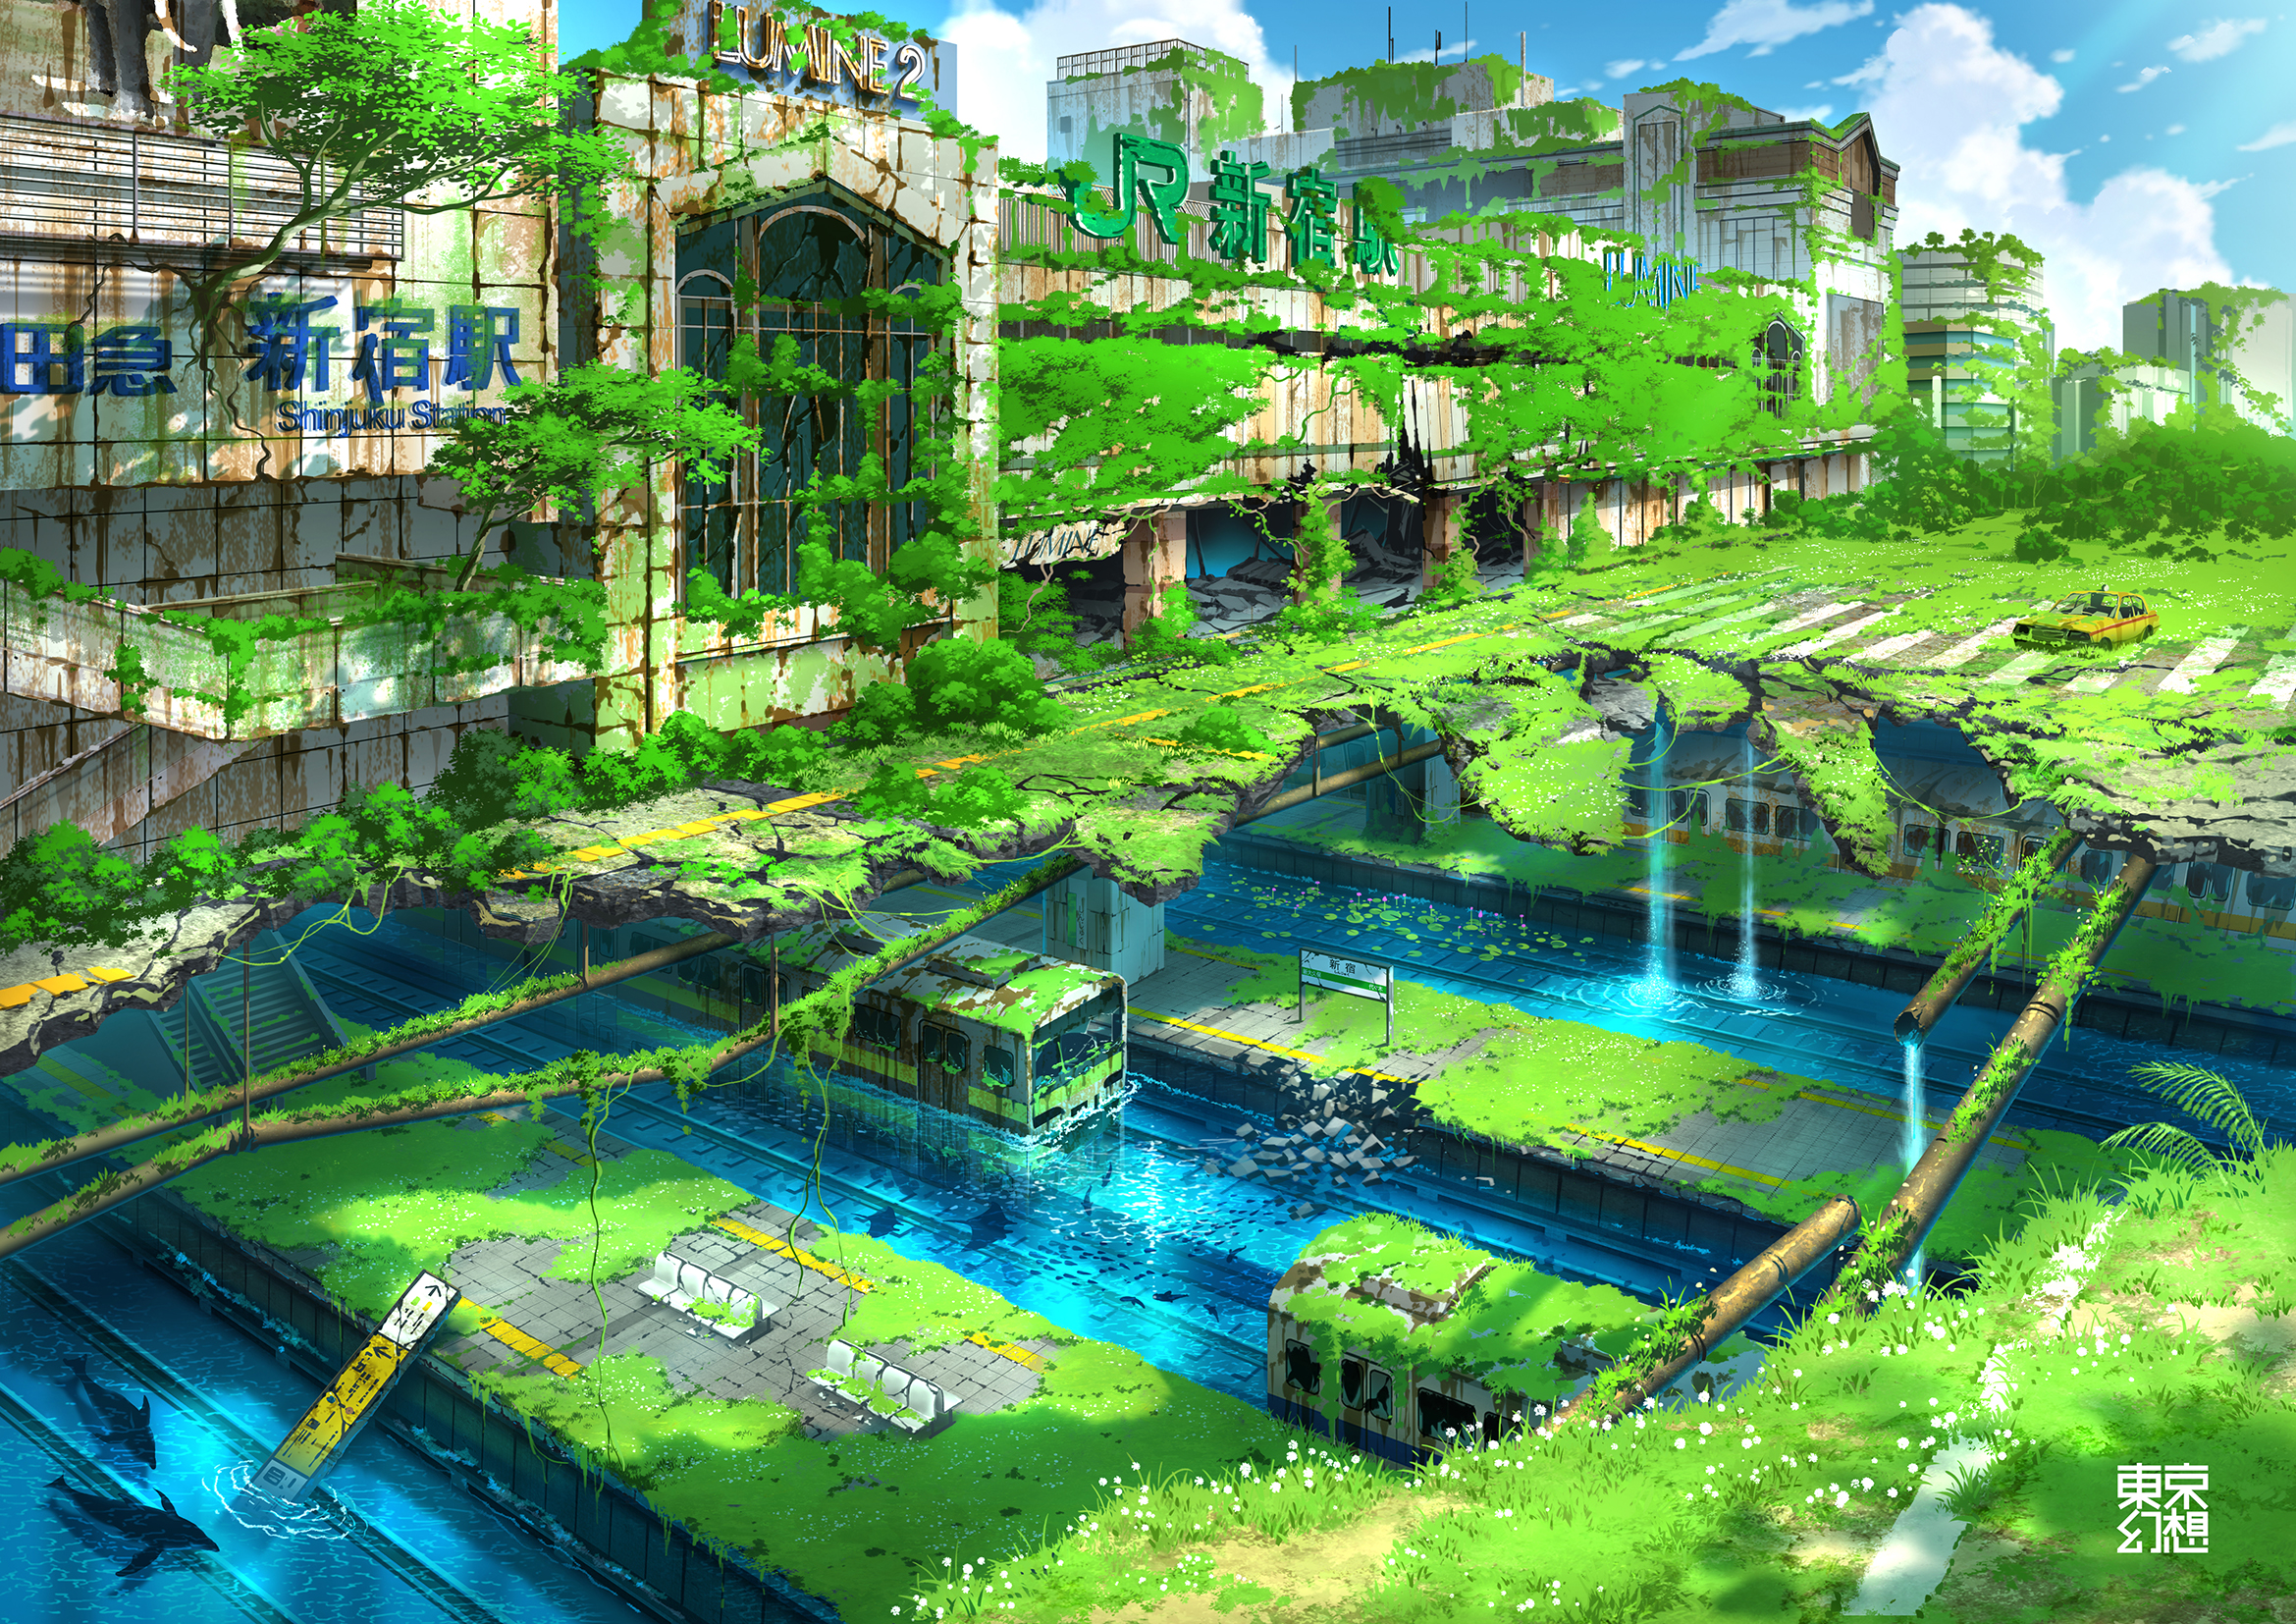 Anime 2339x1654 anime digital art artwork fantasy art drawing digital painting landscape urban modern grass plants water train train station railway ruins outdoors clouds Sun sun rays architecture building apocalyptic city nature wood old building TokyoGenso